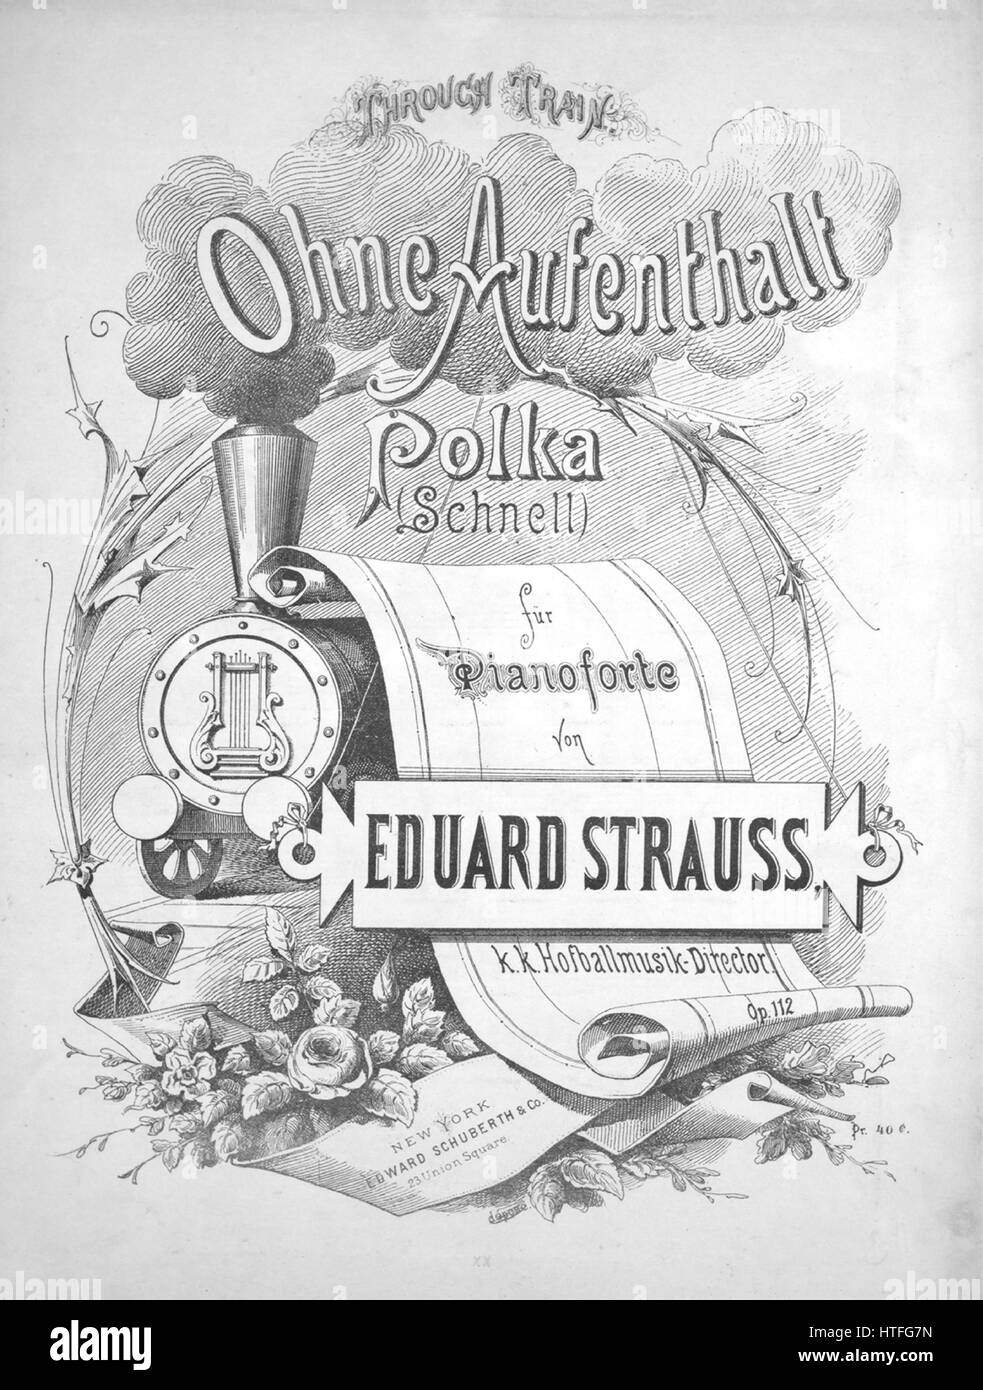 Sheet music cover image of the song 'Ohne Aufenthalt (Through Train) Polka (Schnell) fur Pianoforte', with original authorship notes reading 'Von Eduard Strauss, KK Hofballmusik-Director, Op 112', United States, 1900. The publisher is listed as 'Edward Schuberth and Co., 23 Union Square', the form of composition is 'sectional', the instrumentation is 'piano', the first line reads 'None', and the illustration artist is listed as 'None'. Stock Photo